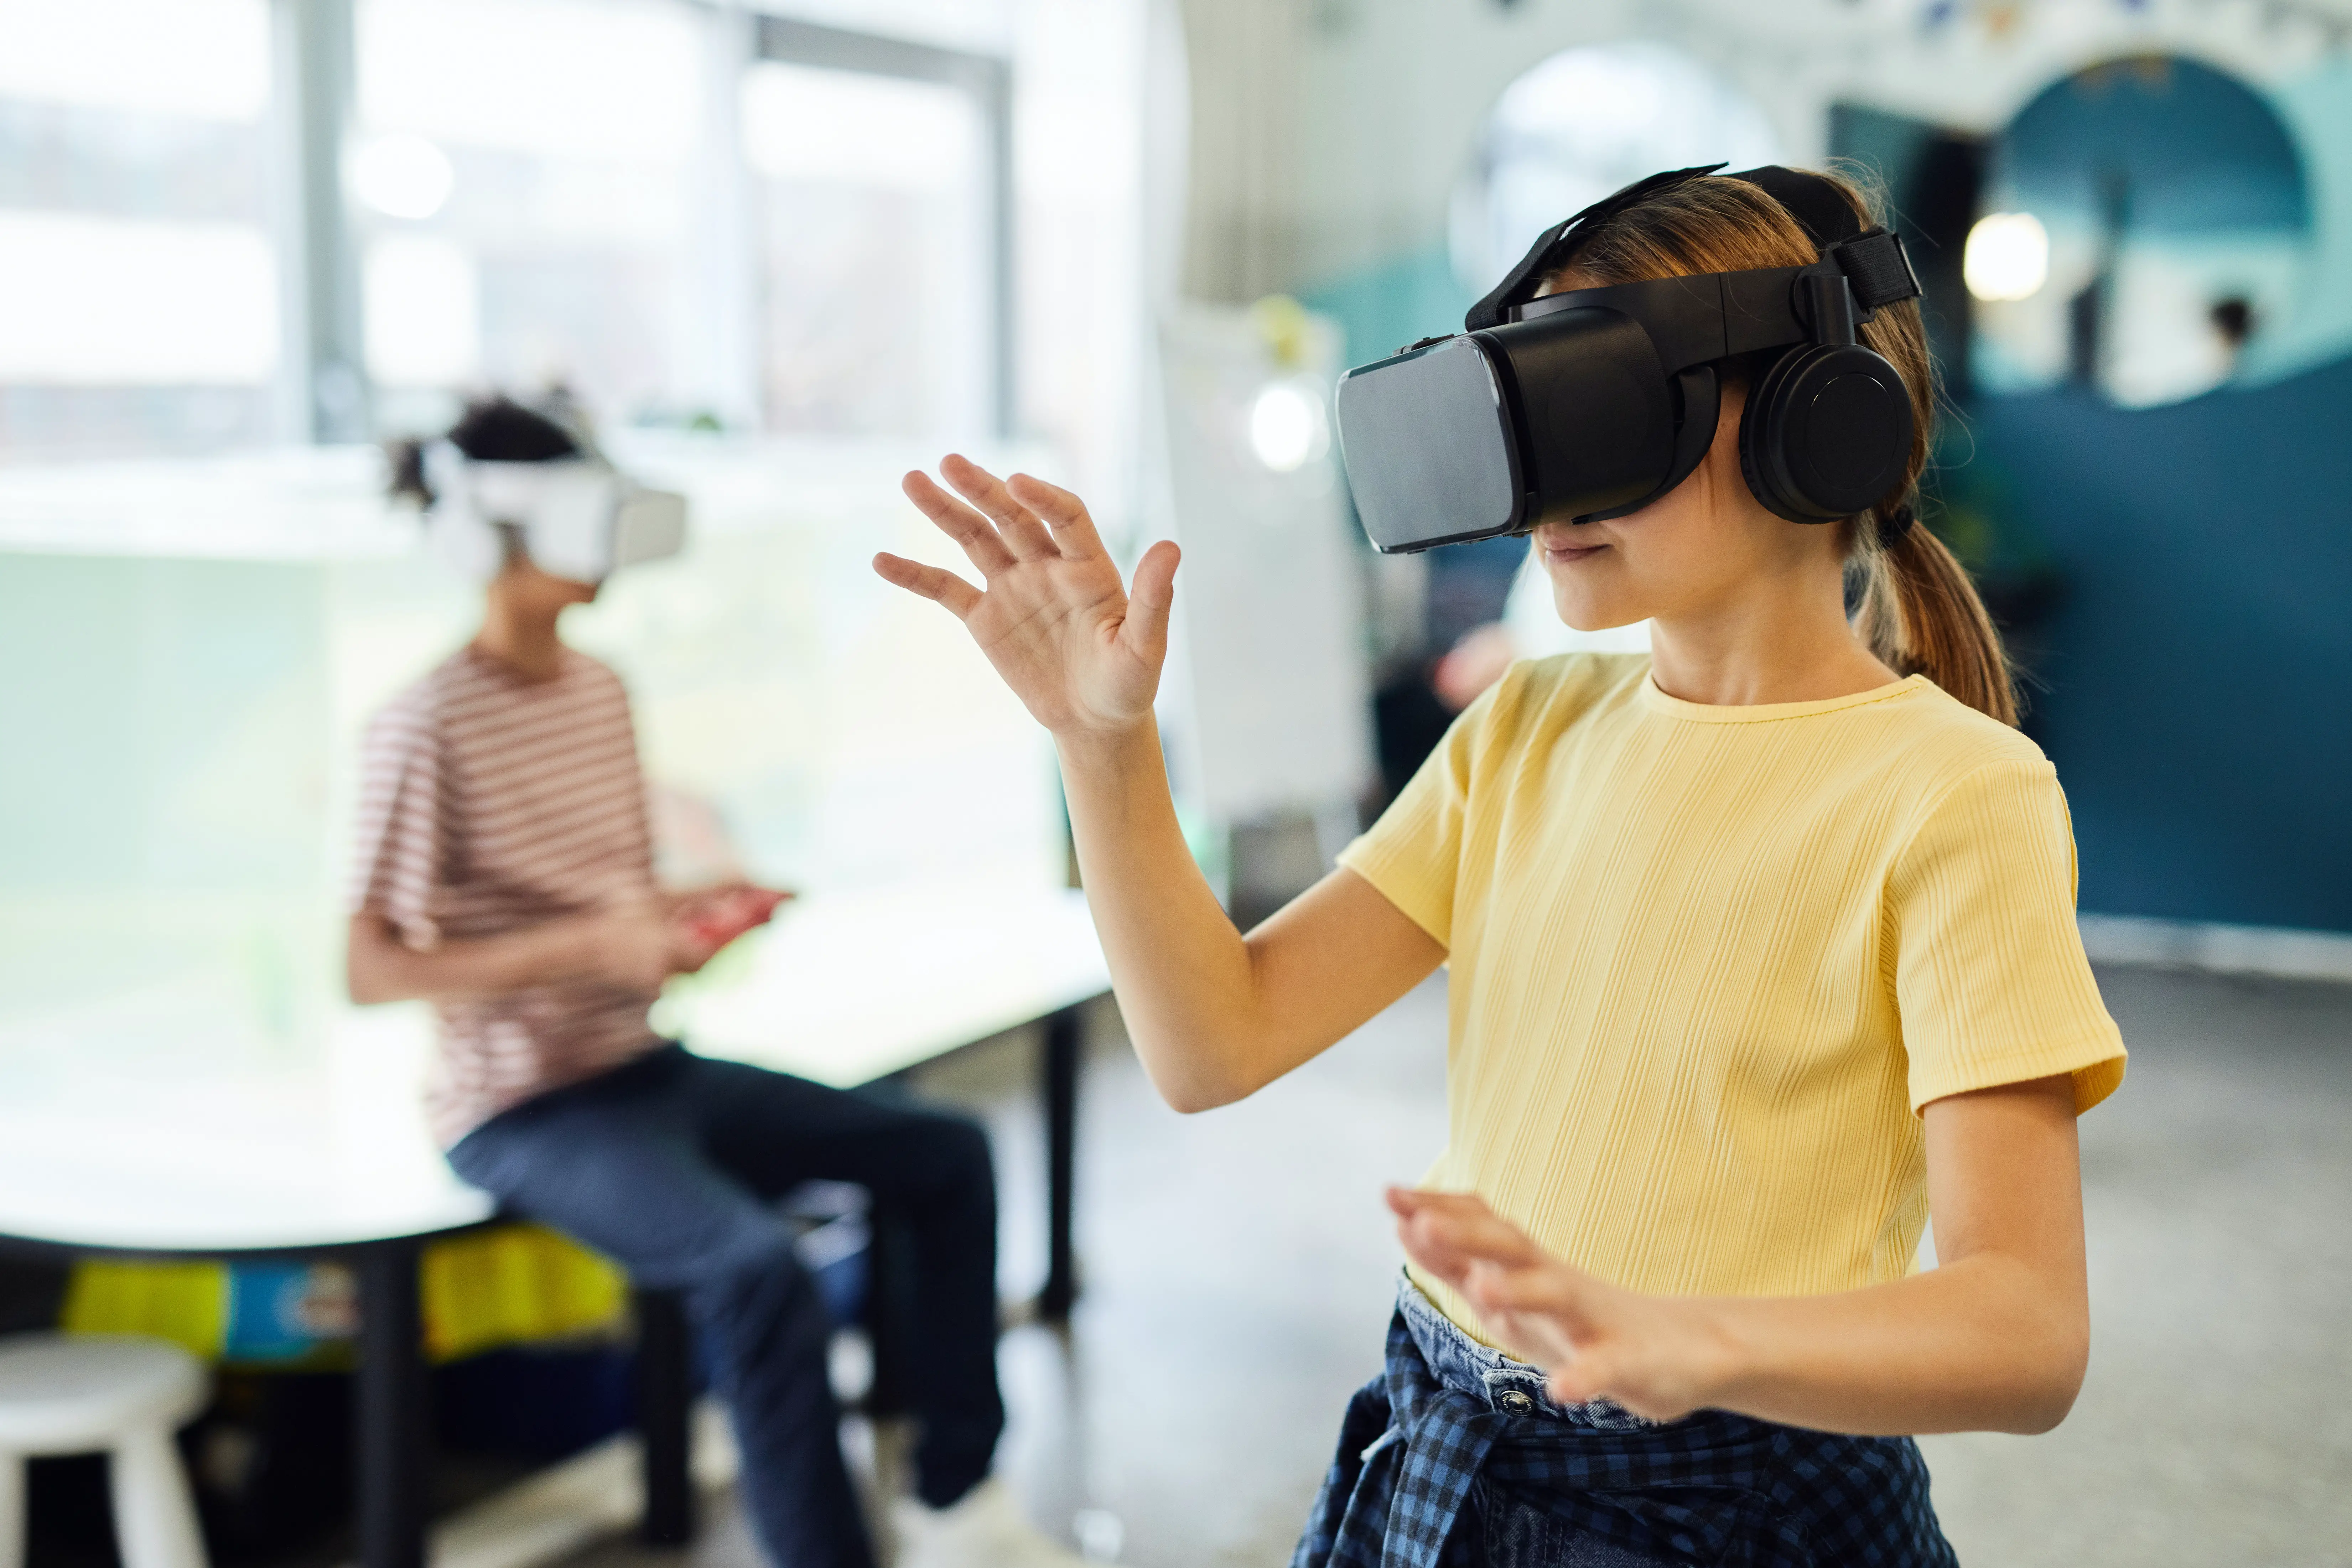 Unity, Meta Partner to Facilitate XR-powered Learning by Supporting Educational Institutions